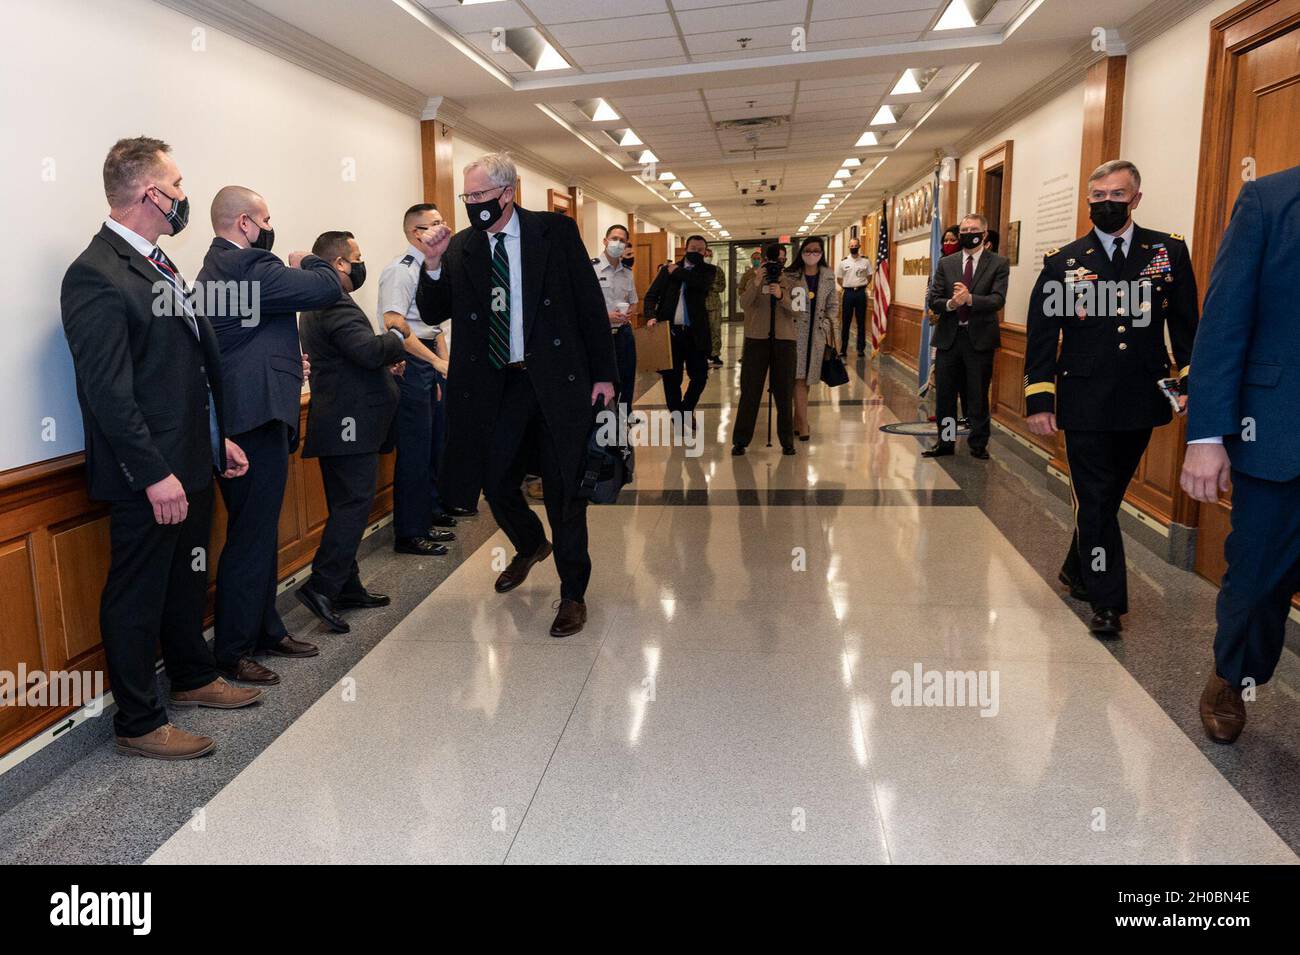 Outgoing Acting Defense Secretary Chris Miller greets staff as he departs the Pentagon during the administration transition, the Pentagon, Washington, D.C., Jan. 20, 2021. Stock Photo